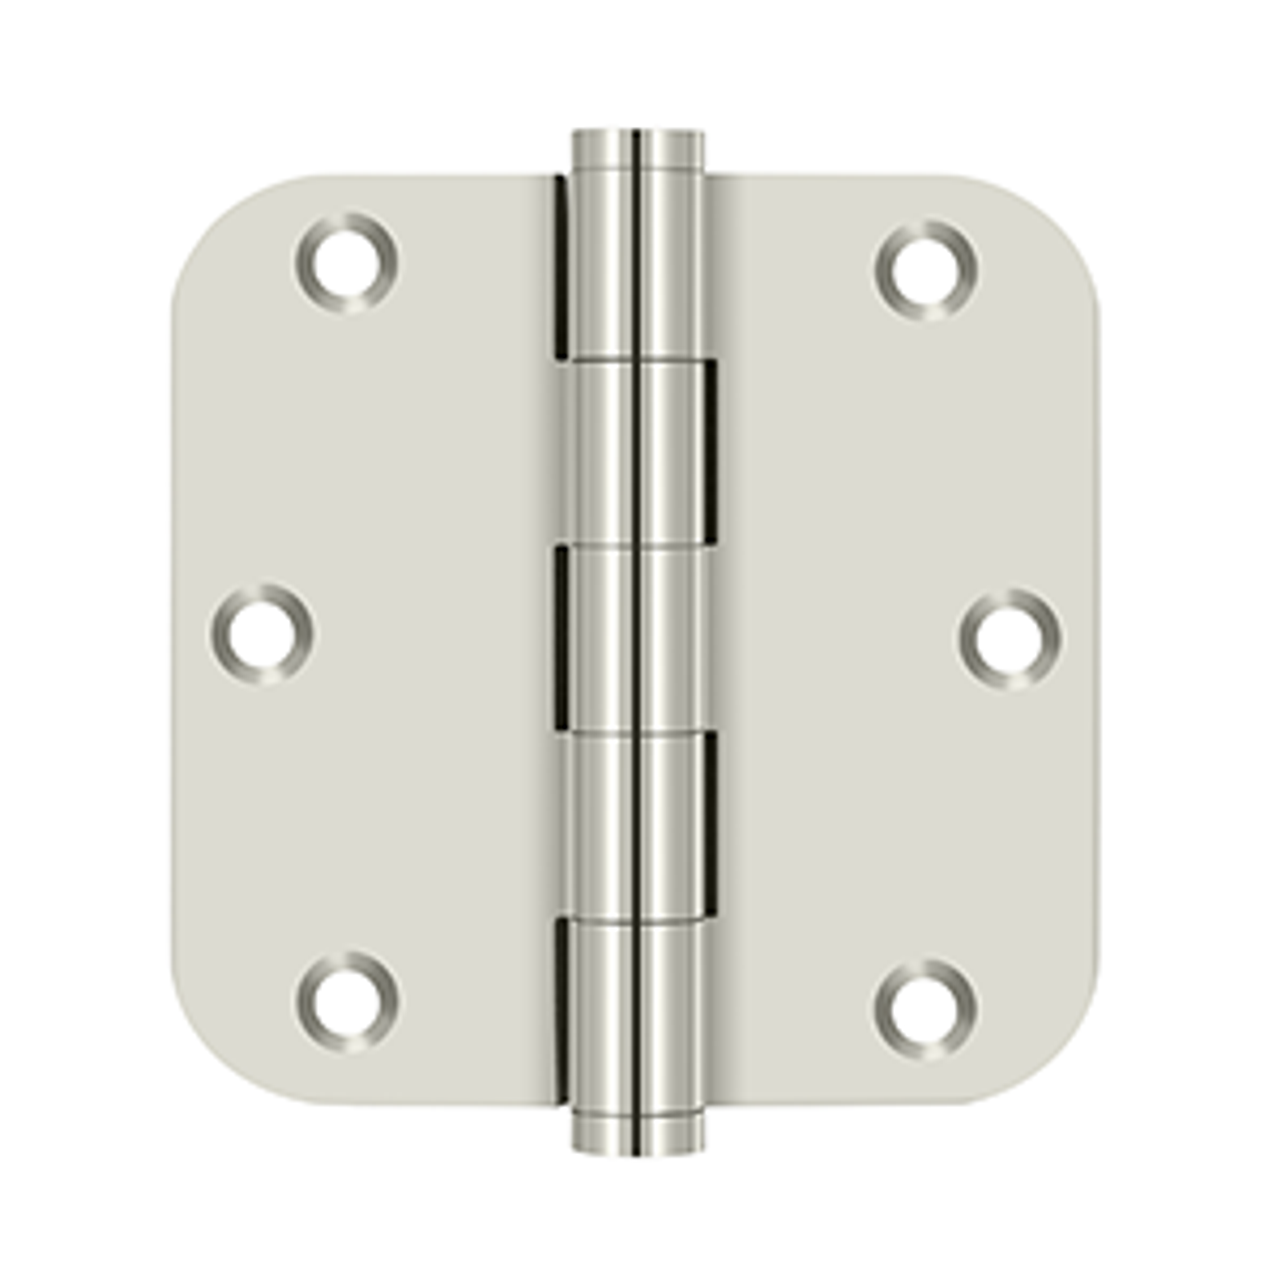 Deltana DSB35R5R SERIES RESIDENTIAL SOLID BRASS 3-1/2" X 3-1/2" X 5/8" RADIUS HINGES